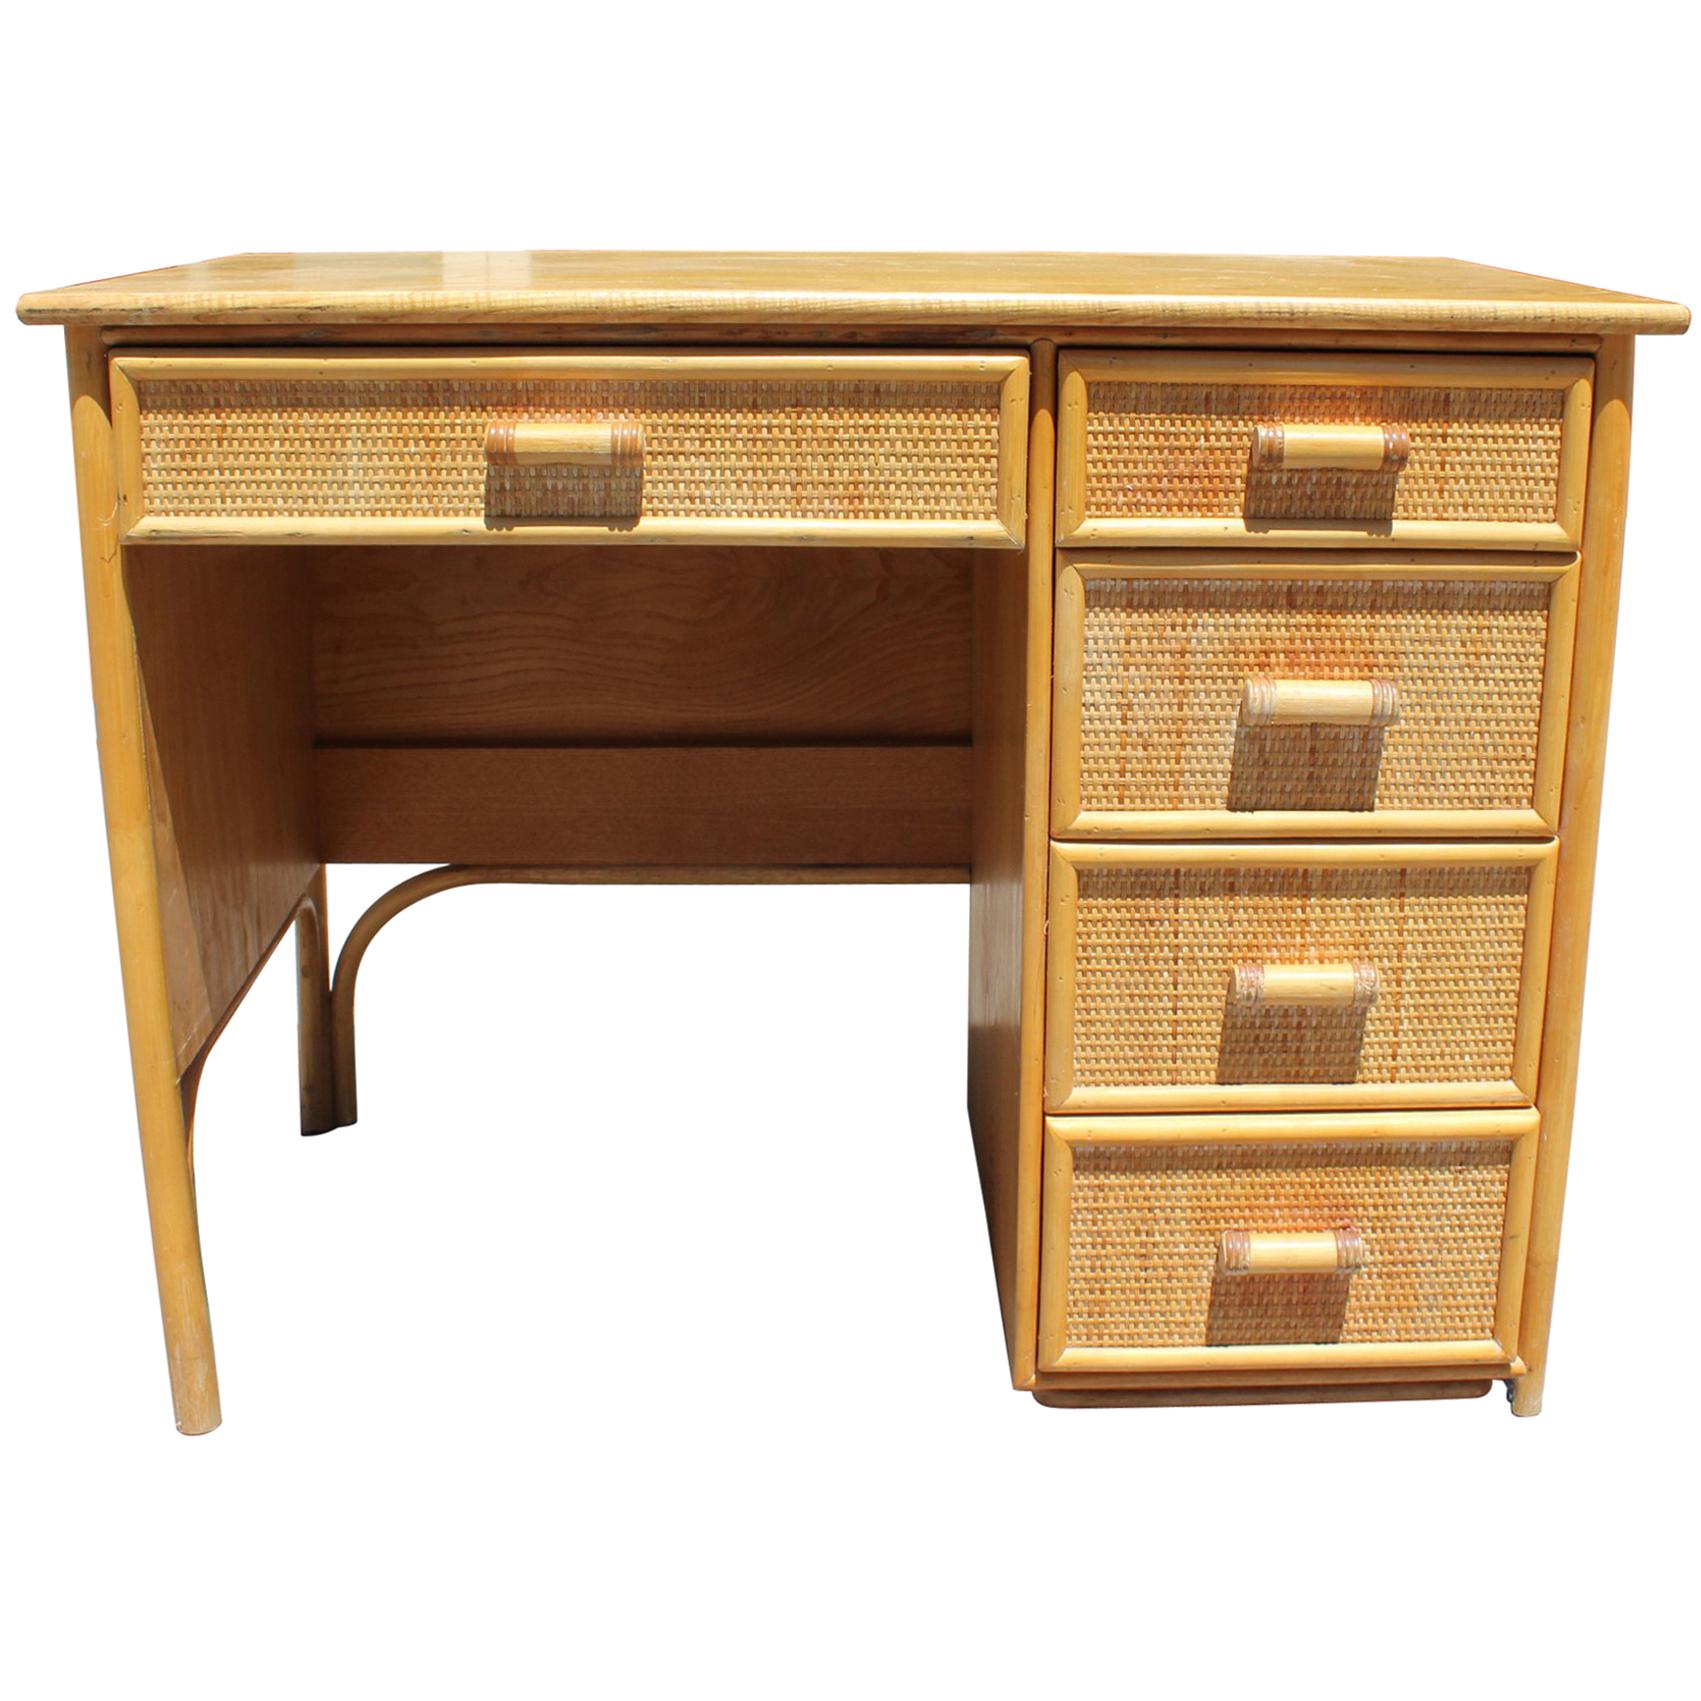 1980s Bamboo and Rattan Desk with Drawers